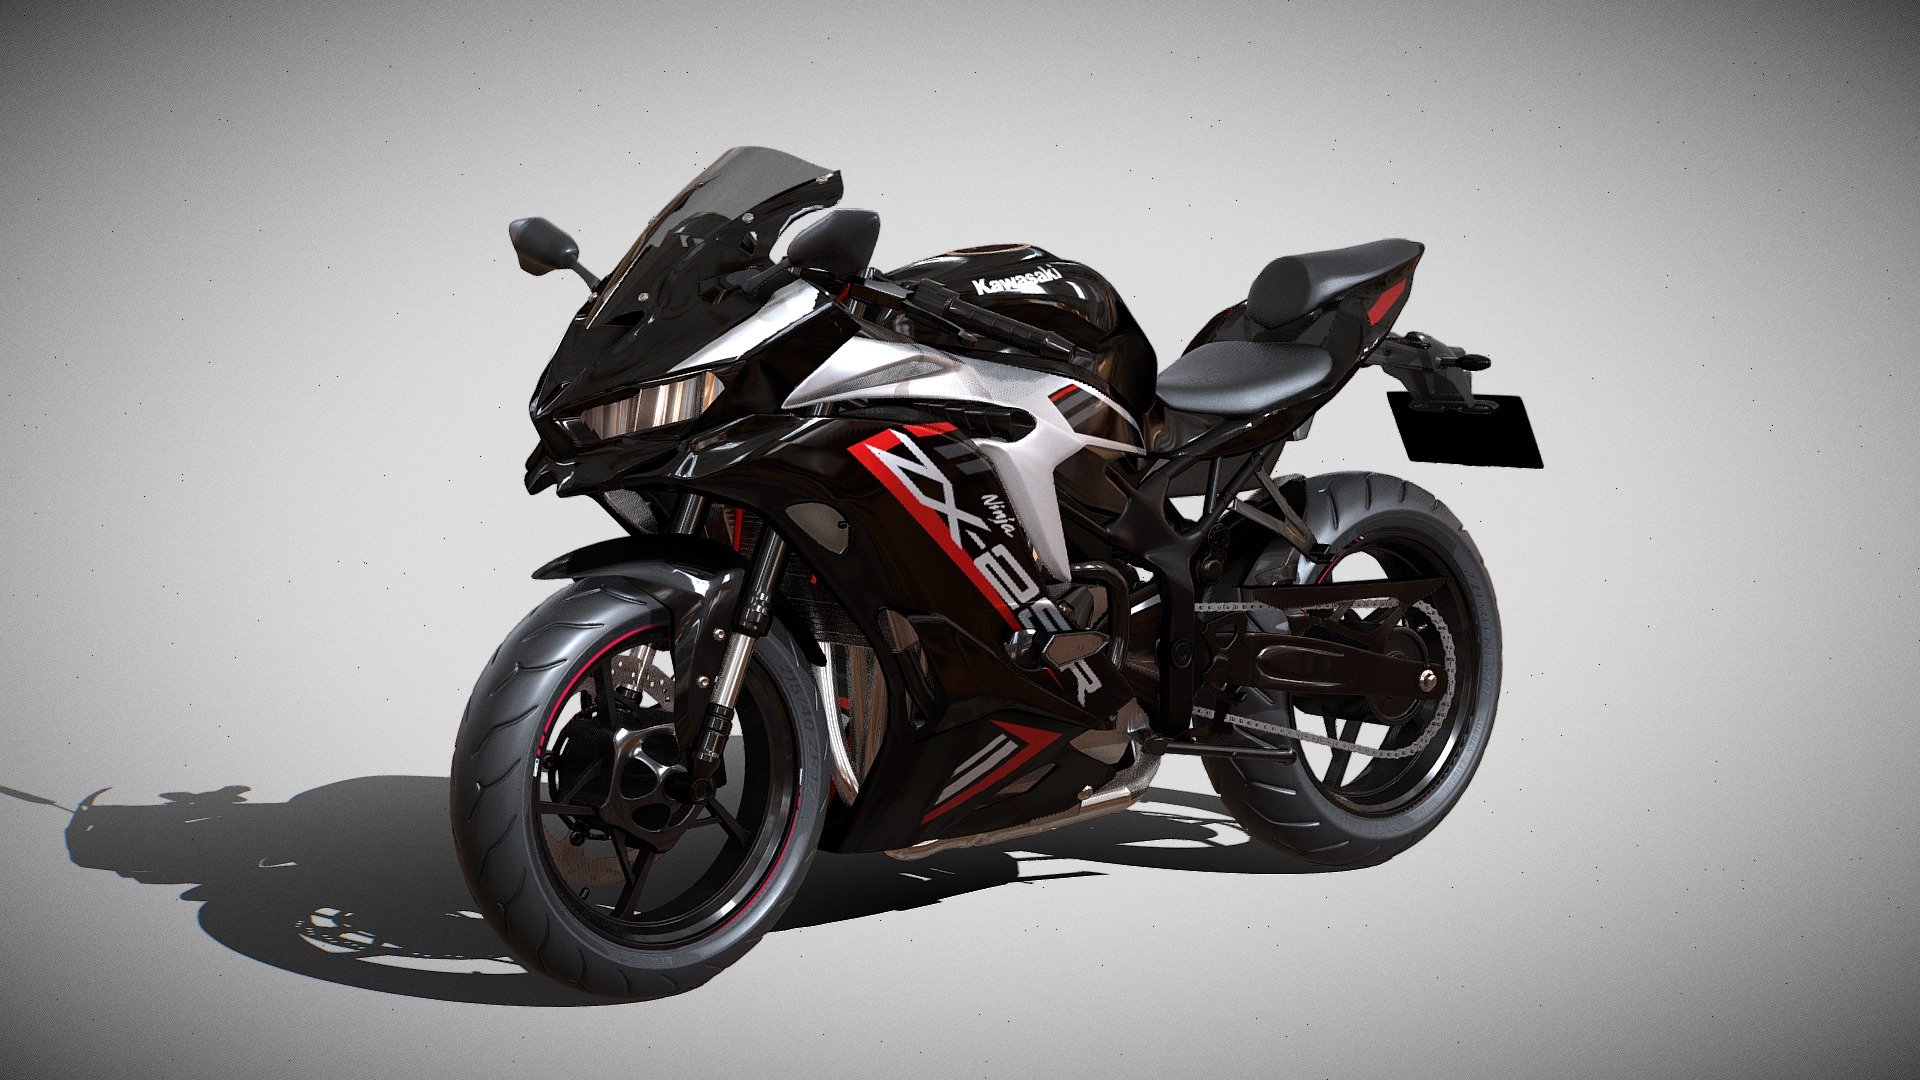 Limited-Time Offers

A high quality model of KAWASAKI NINJA ZX25R 2023 Game ready VR/AR Compatible.

Every object has material’s name, you can easily change or apply materials.

Low Poly can be used in VR,Games Etc

Specs: All the textures are in jpg format and UVW wrapped. Model is fully textured with based on real object. All textures and materials are included and mapped in every format. Model does not include any backgrounds or scenes used in preview images. Renders made with Blender in Cycles.

This model is high quality, photo realalistic. The model has a fully textured, detailed design that allows for close-up renders, and was originally modeled and Textured in Blender. Fidelity is optimal up to a 4k render

If you liked my model, please leave some feedback. Thank you!

Hope you like it! Also check out my other models, just click on my user name to see complete gallery 3d model